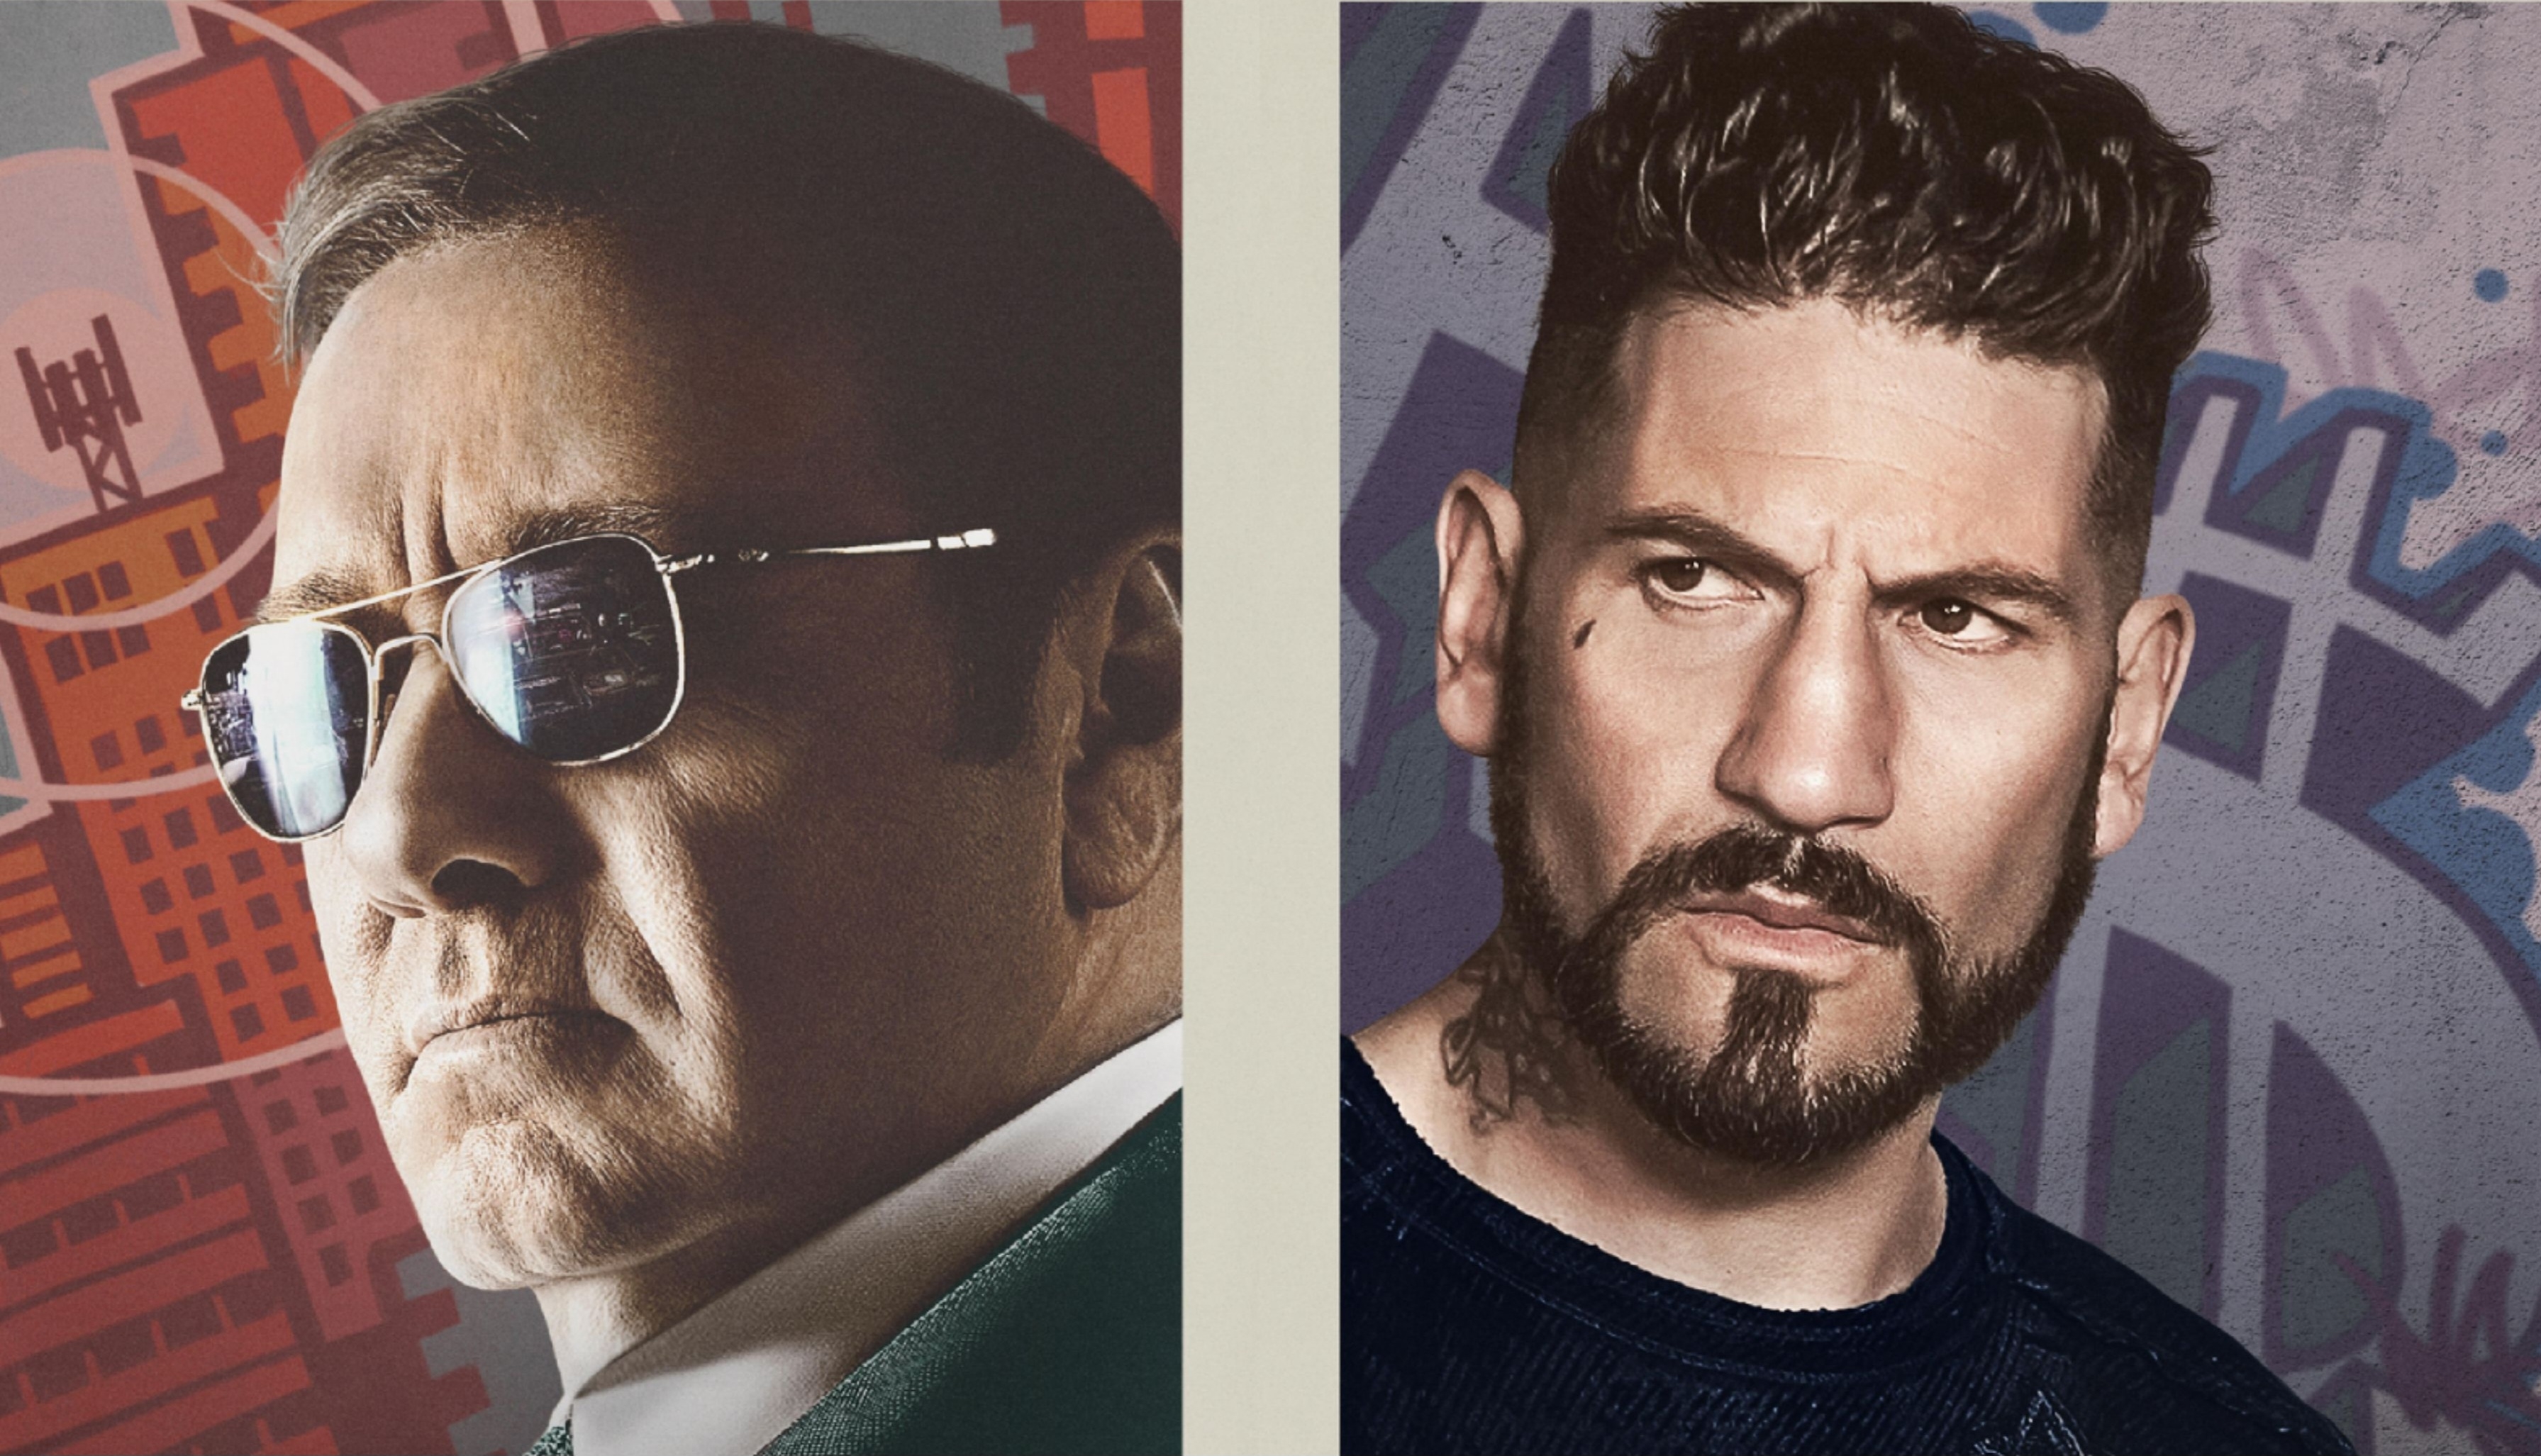 Theatrical posters for &quot;Baby Driver&quot; featuring Kevin Spacey wearing sunglasses on the left and Jon Bernthal on the right